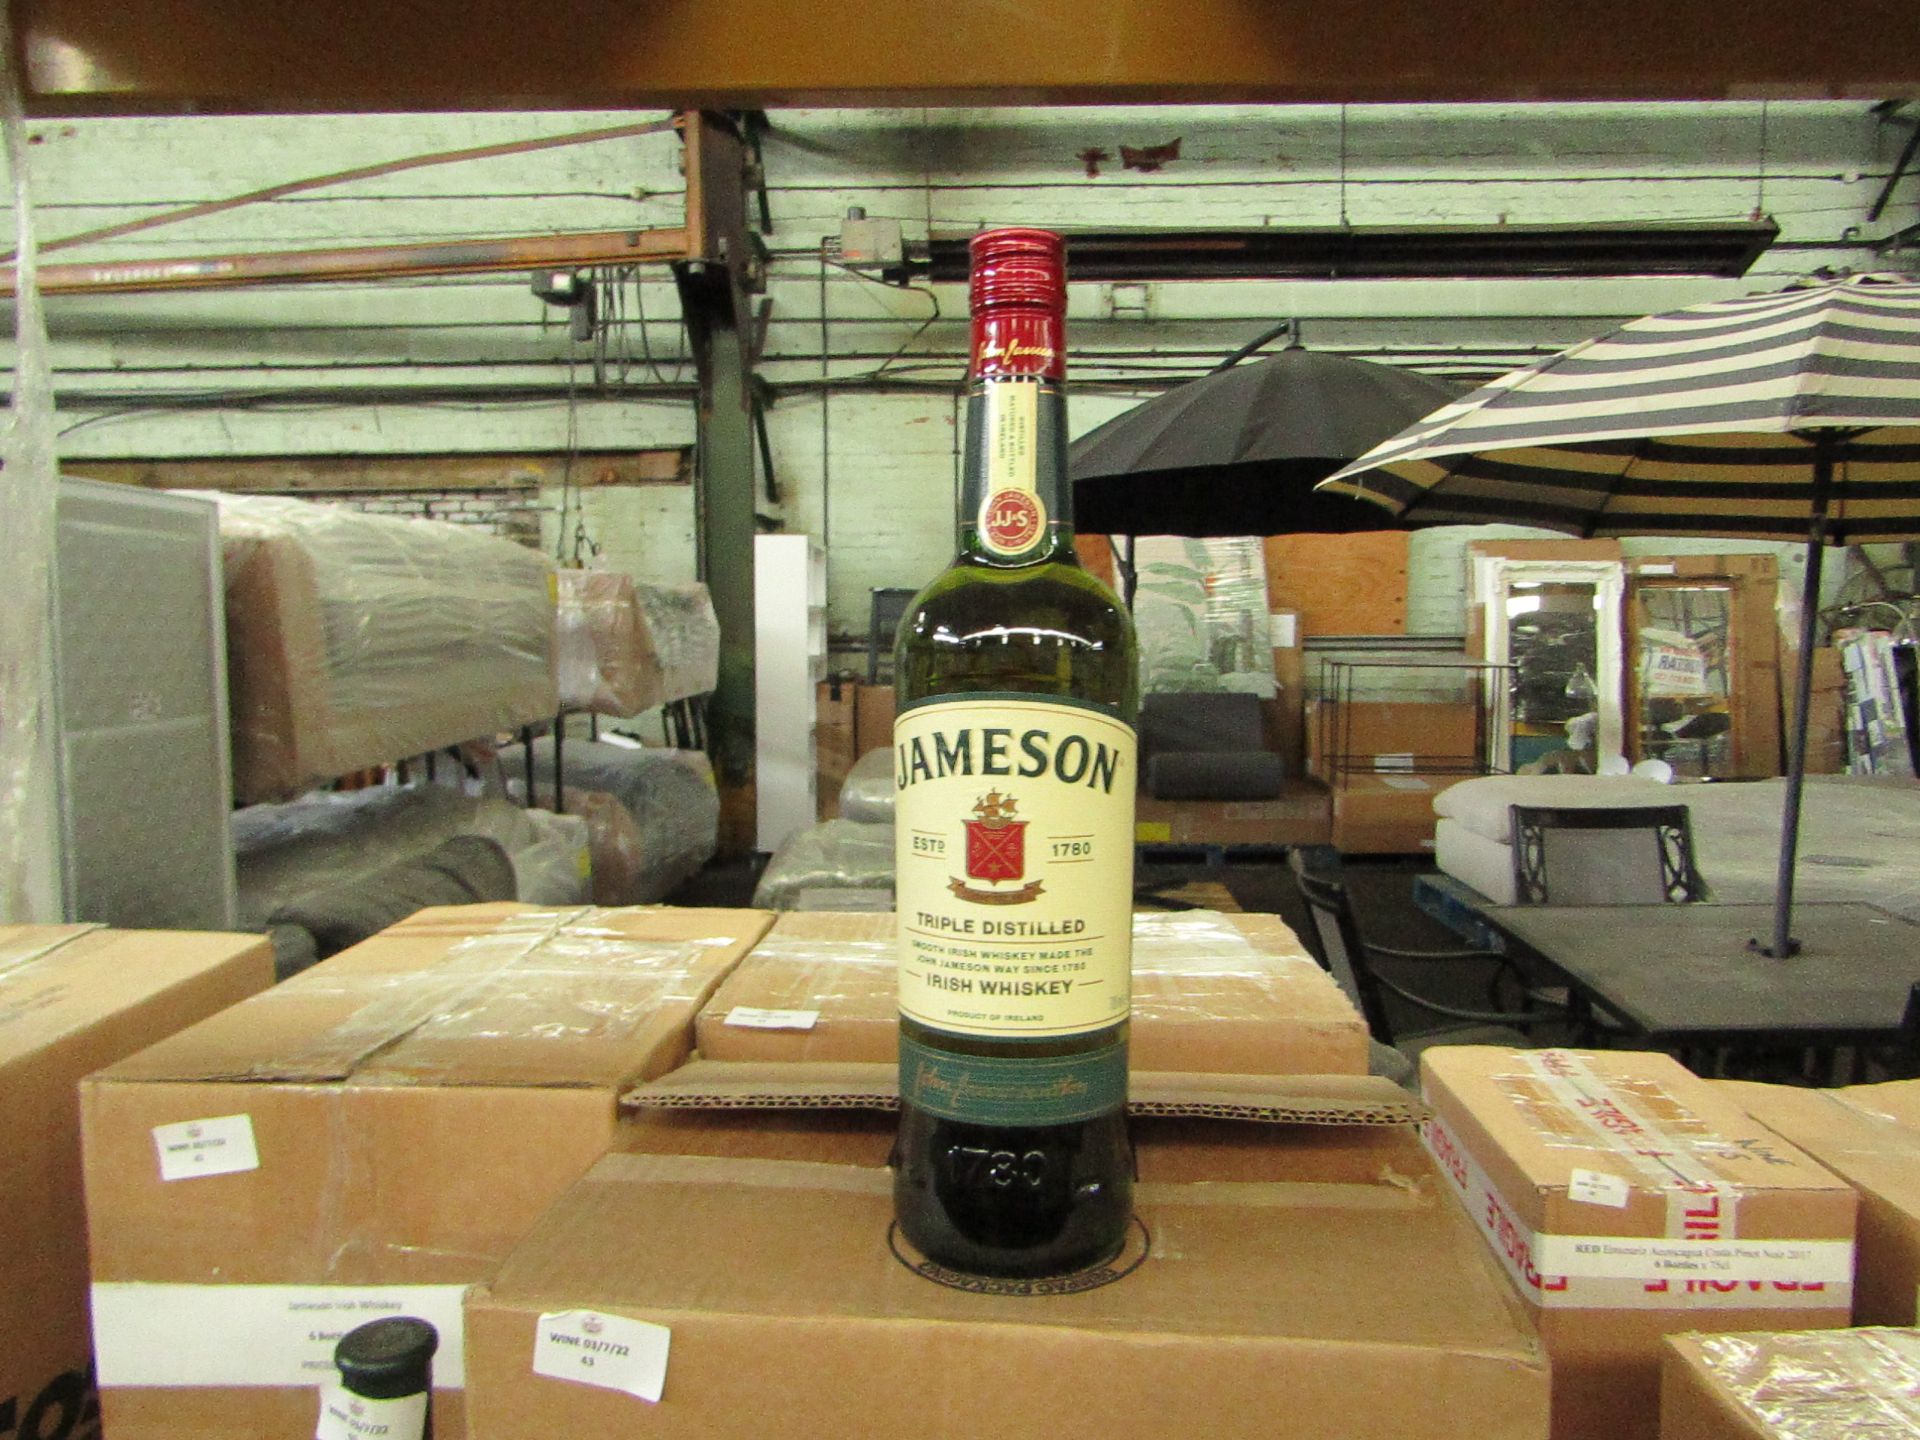 6x 75cl Bottles of Jameson Irish Whiskey - RRP £114 for the case